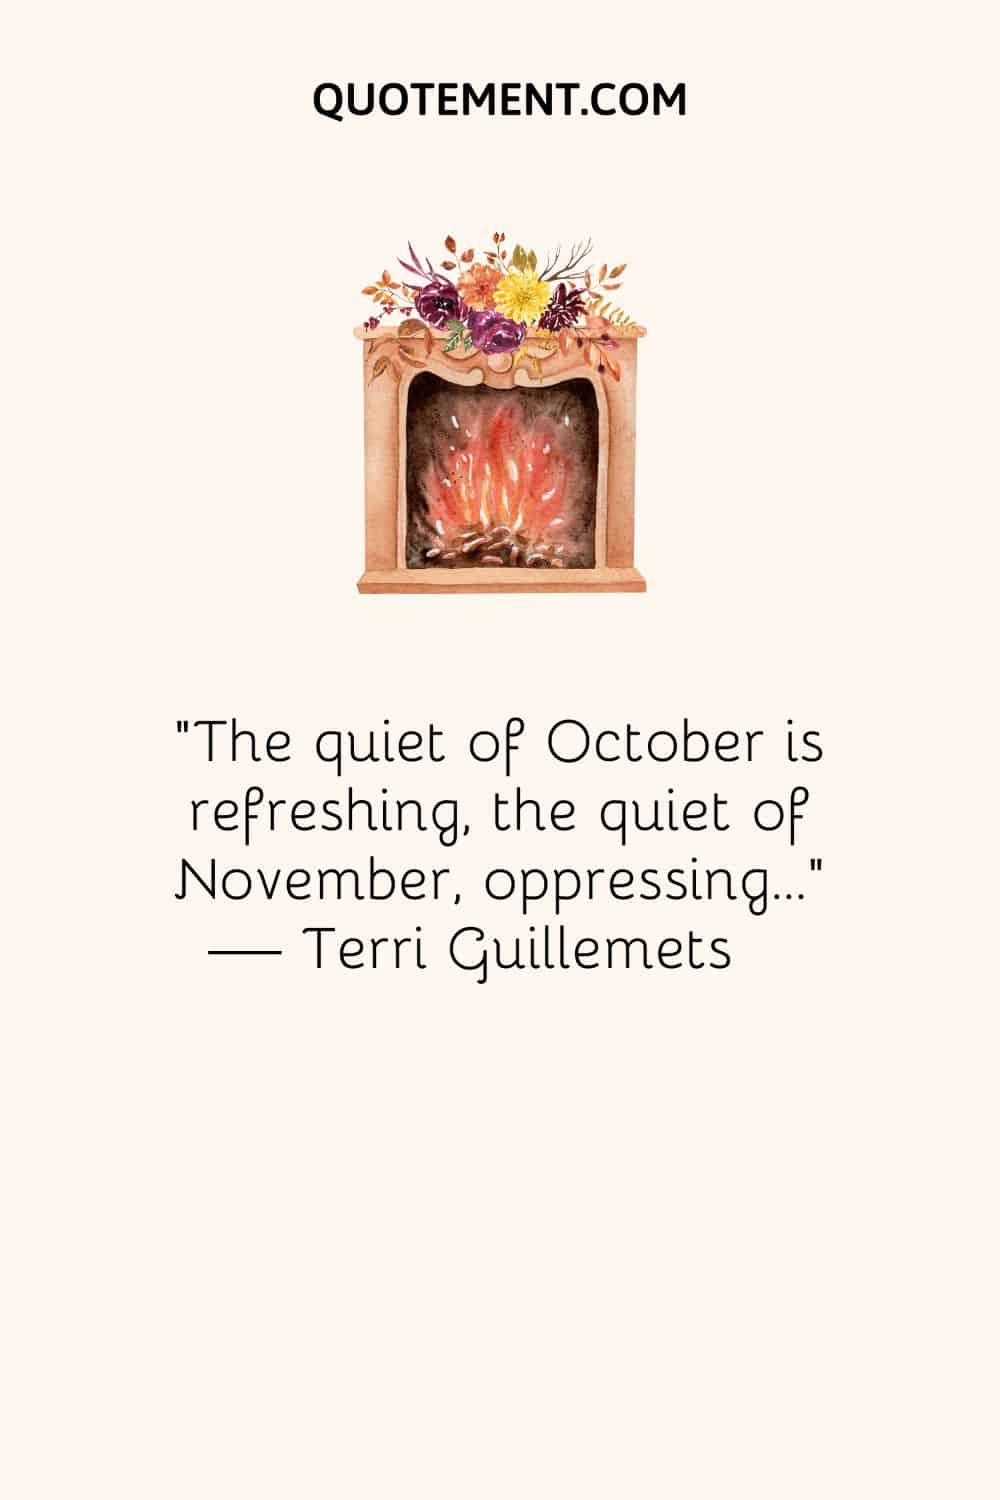 The quiet of October is refreshing, the quiet of November, oppressing…